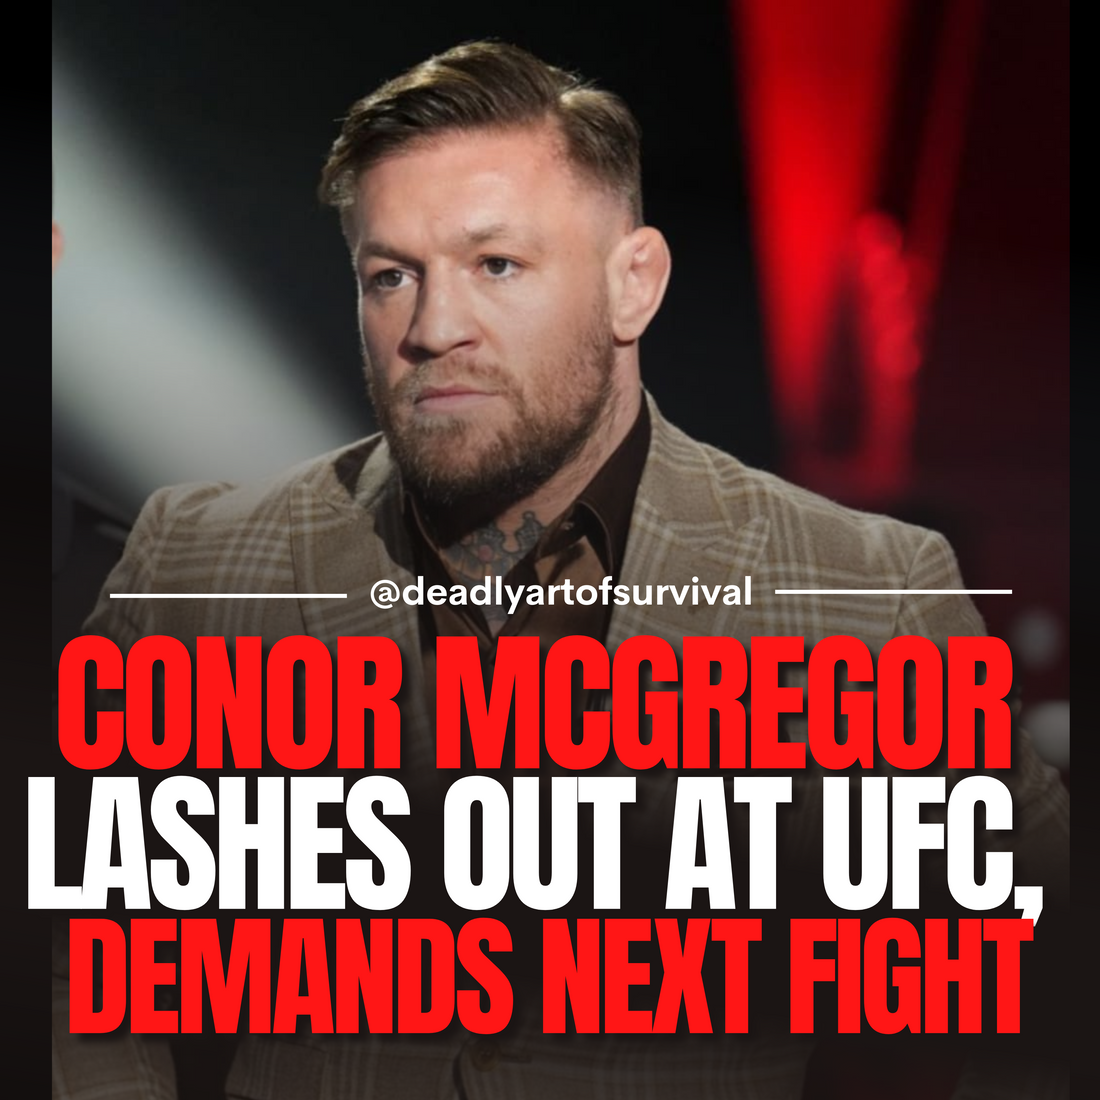 Conor-McGregor-Fed-Up-Lashes-Out-at-UFC-Over-Fight-Delays deadlyartofsurvival.com